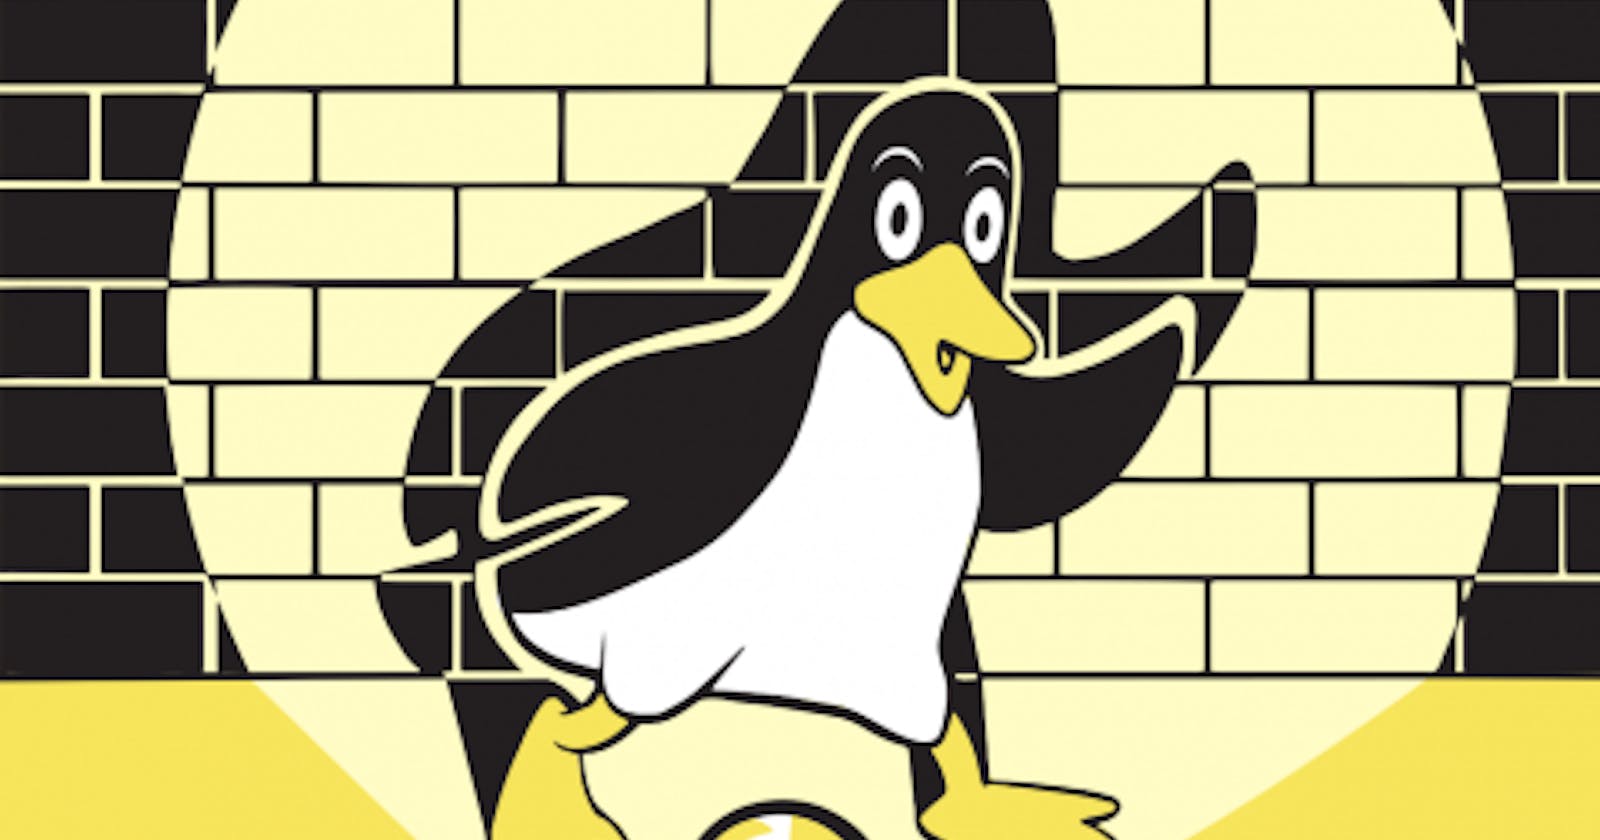 [Book Review] Practical Linux Forensics